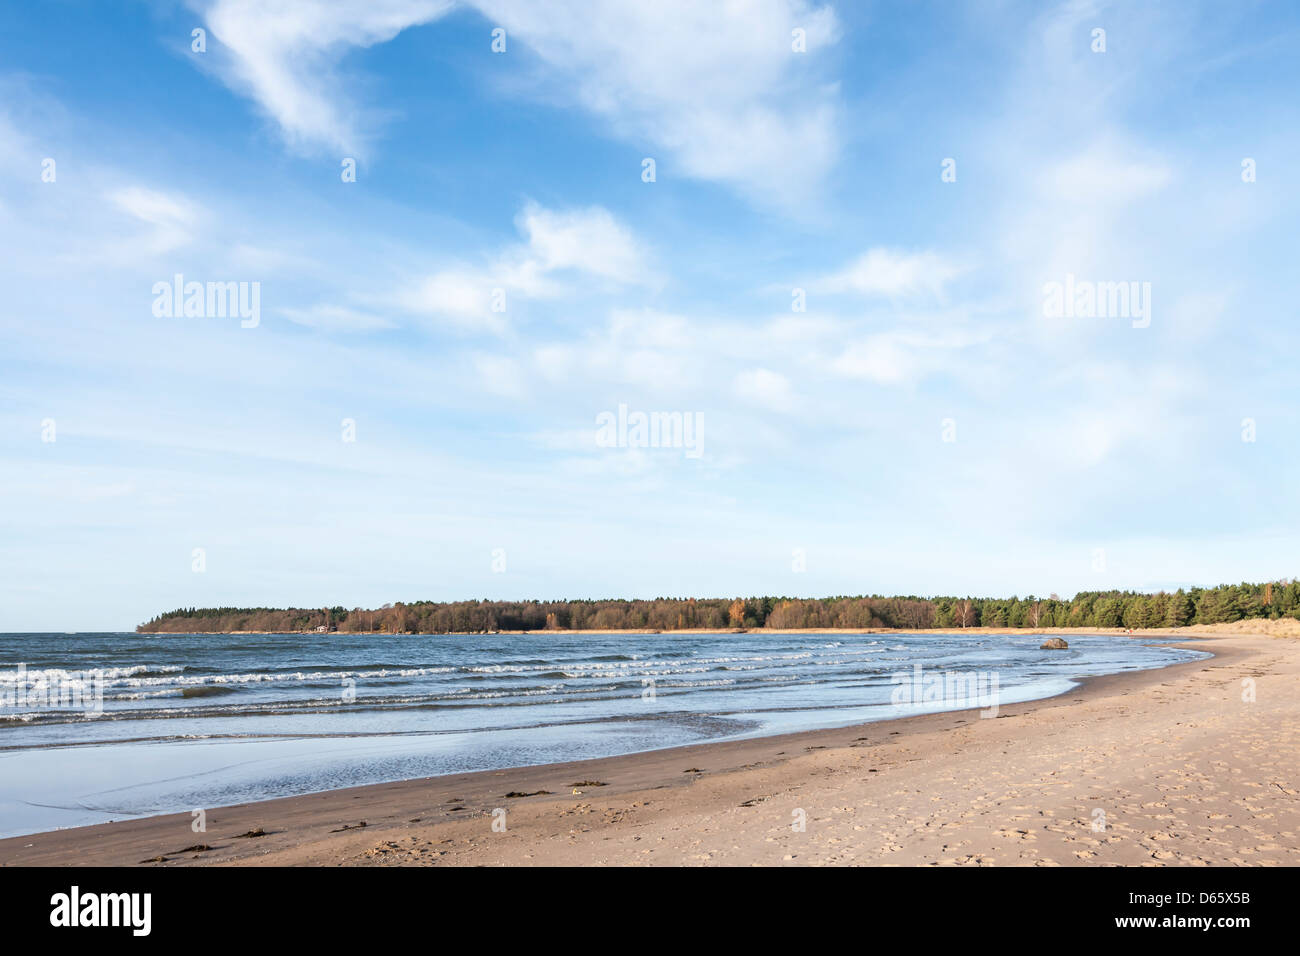 A cold and windy afternoon at Yyteri beach in Pori, Finland. The six-kilometer long sandy beach is famous for its dunes. Stock Photo